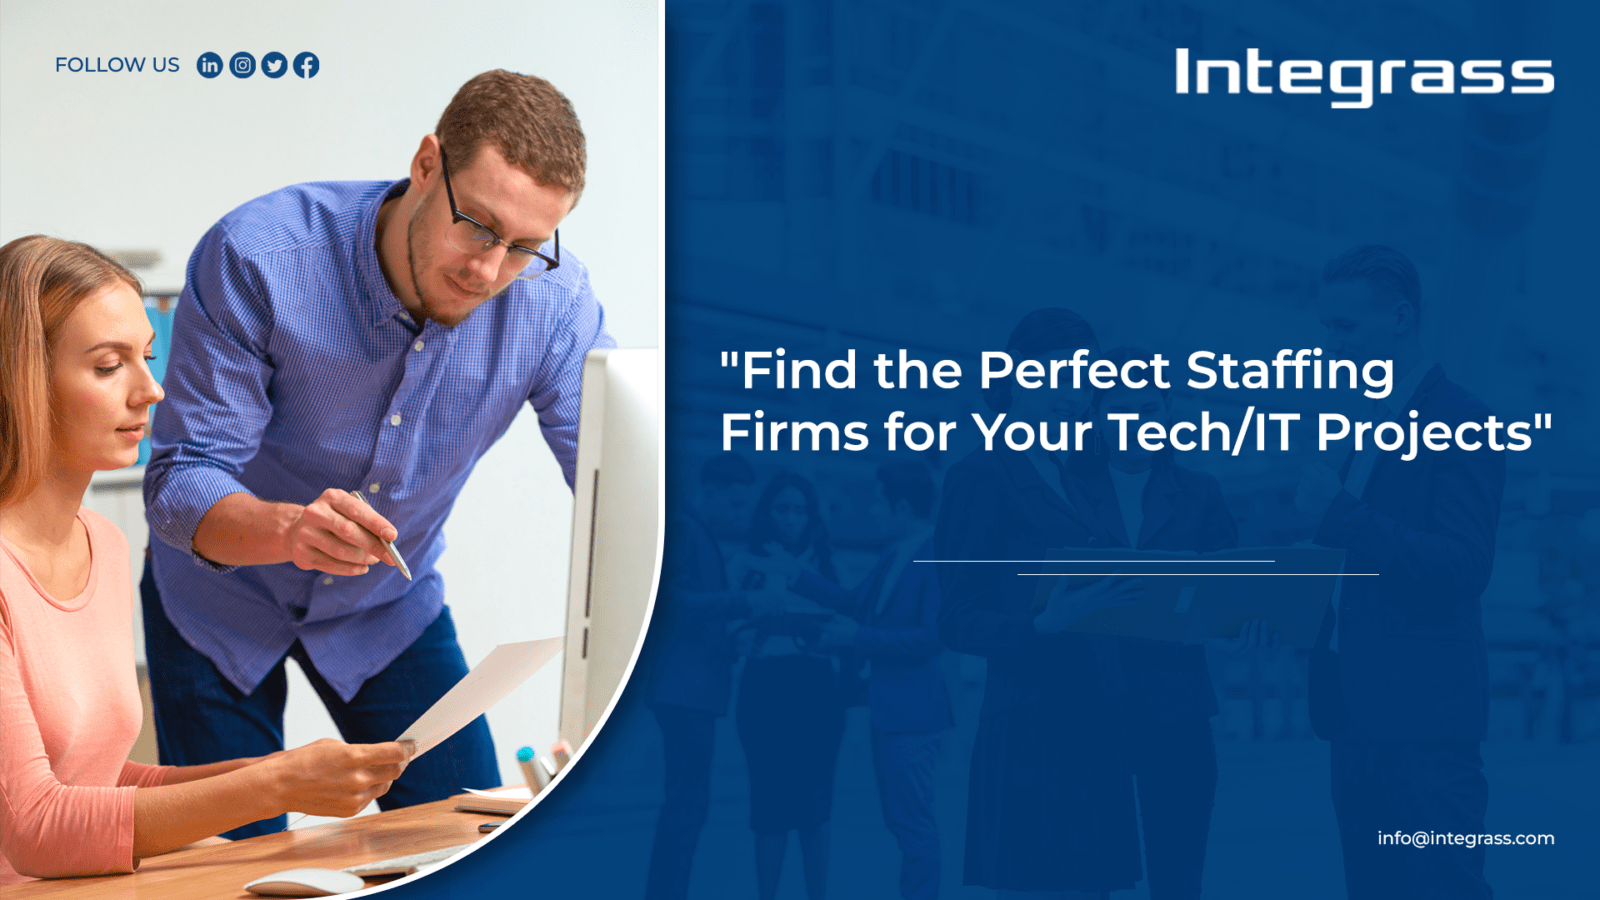 Find the Perfect Staffing Firms for Your Tech/IT Projects